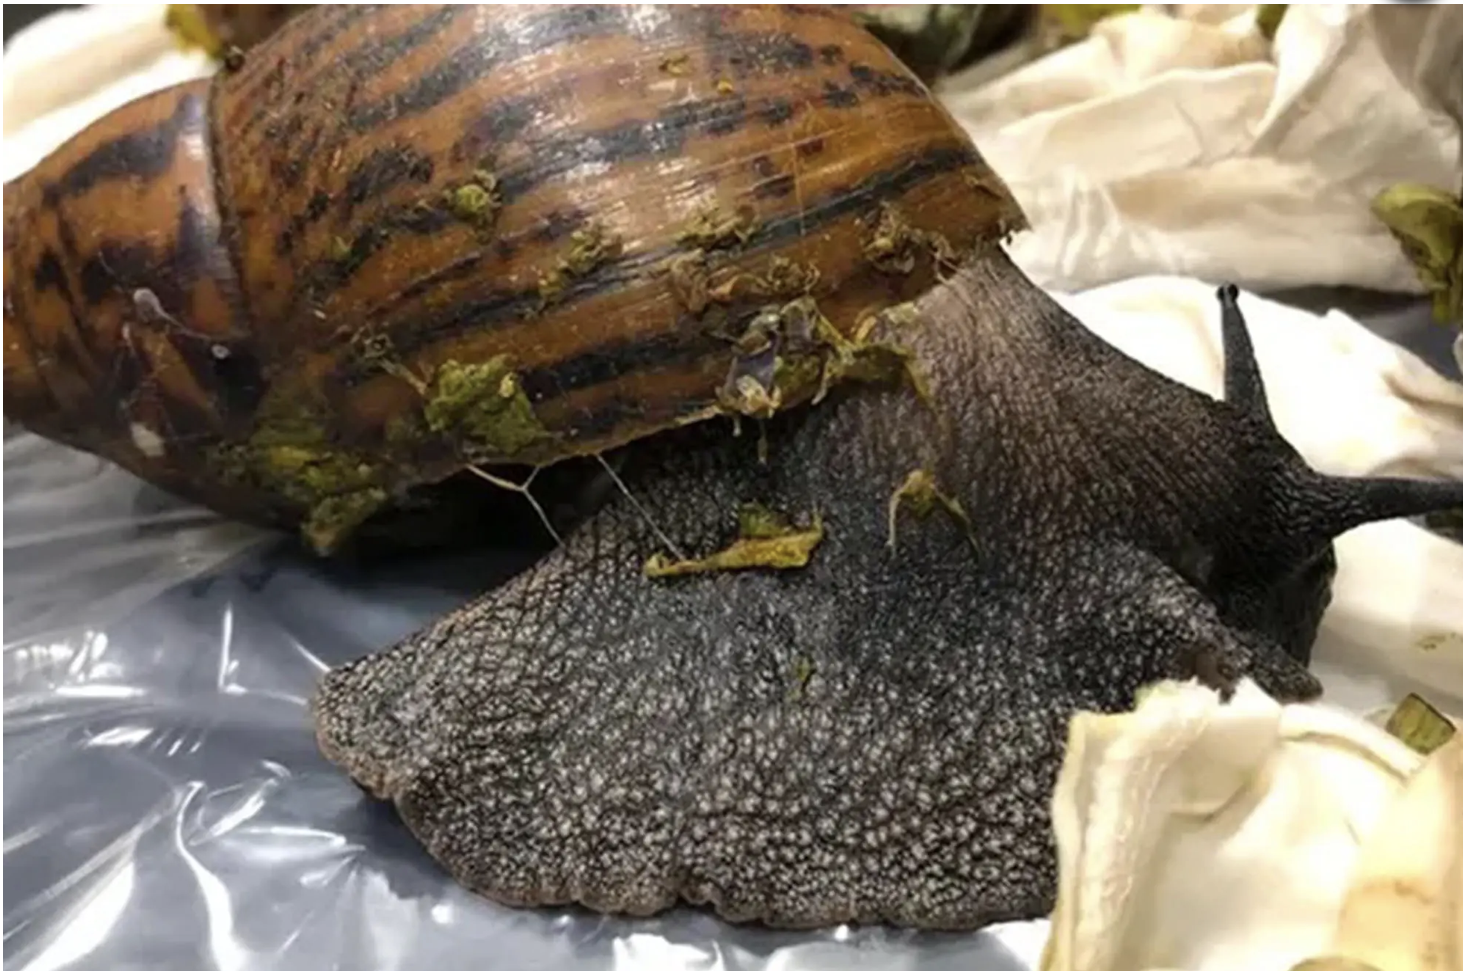 Six Destructive Giant African Snails From Ghana Found By Customs In Detroit Passenger's Luggage - Finish The Race